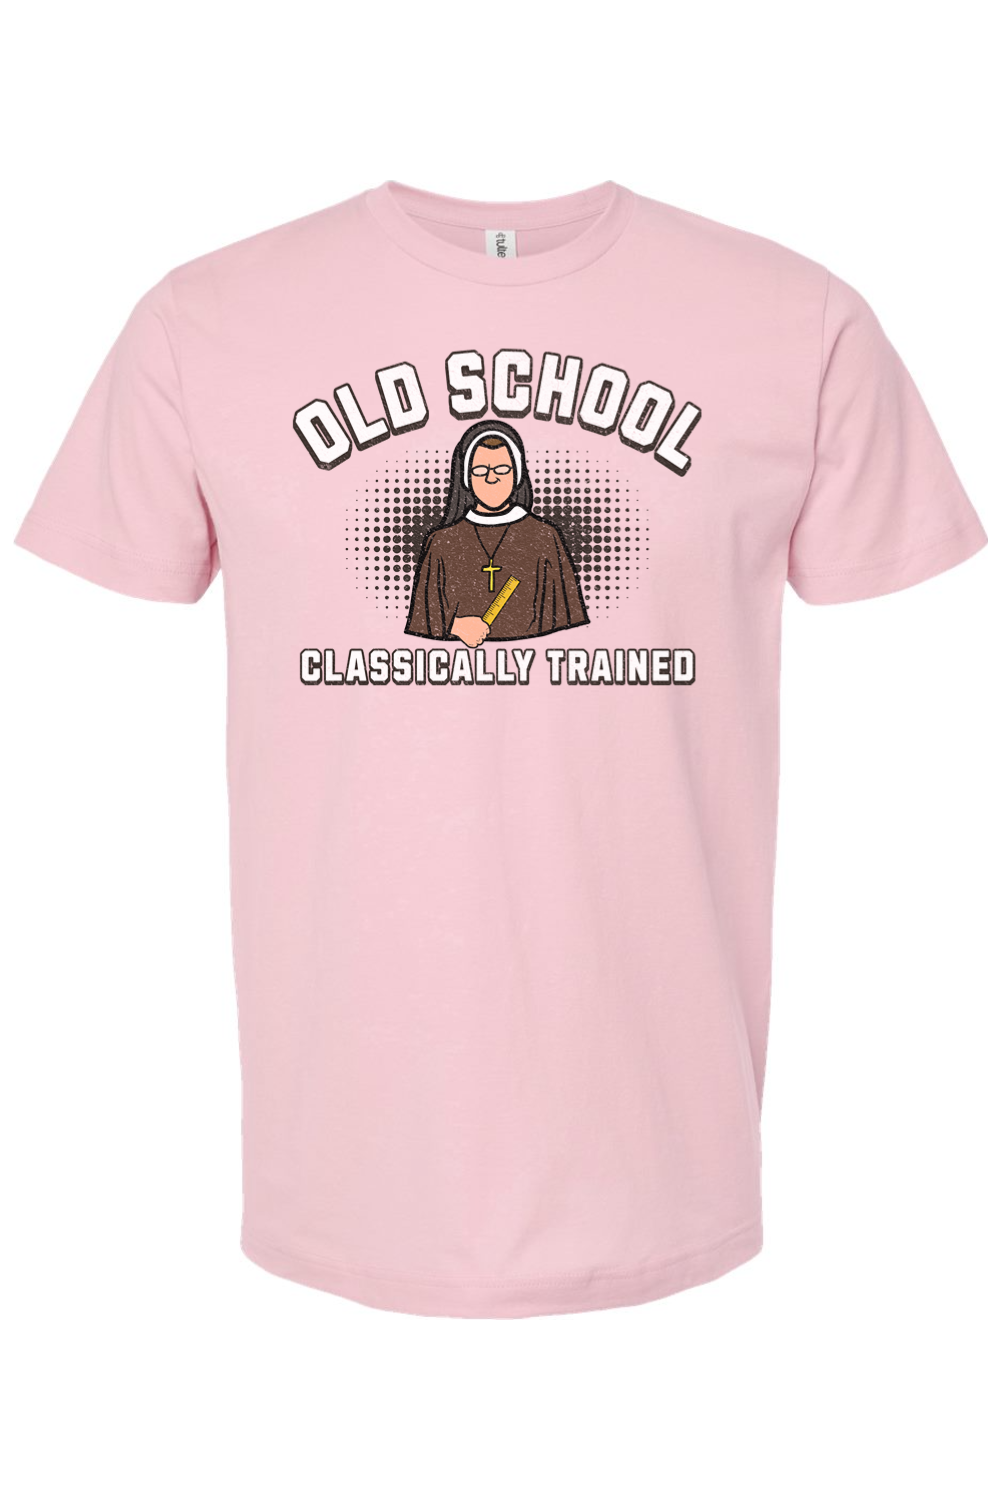 Old School - Classically Trained - T-Shirt